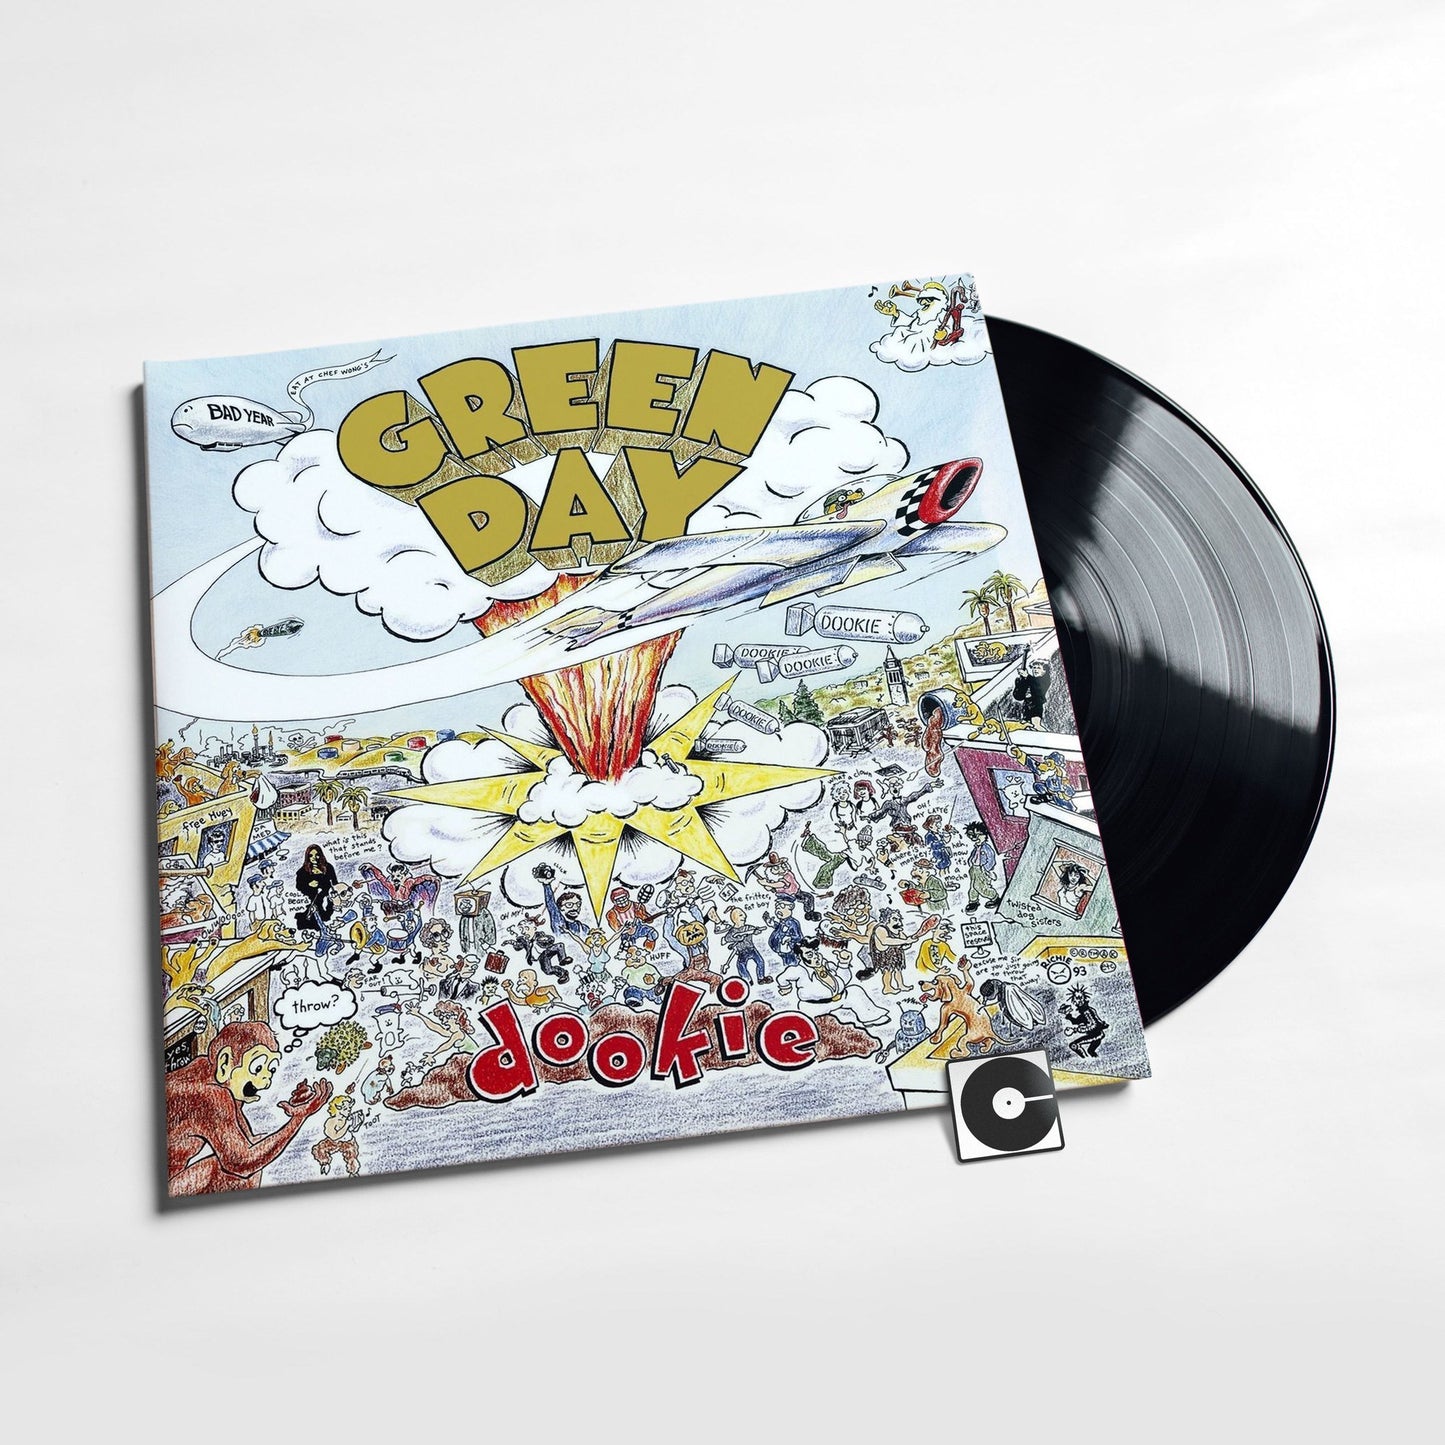 Green Day - "Dookie"